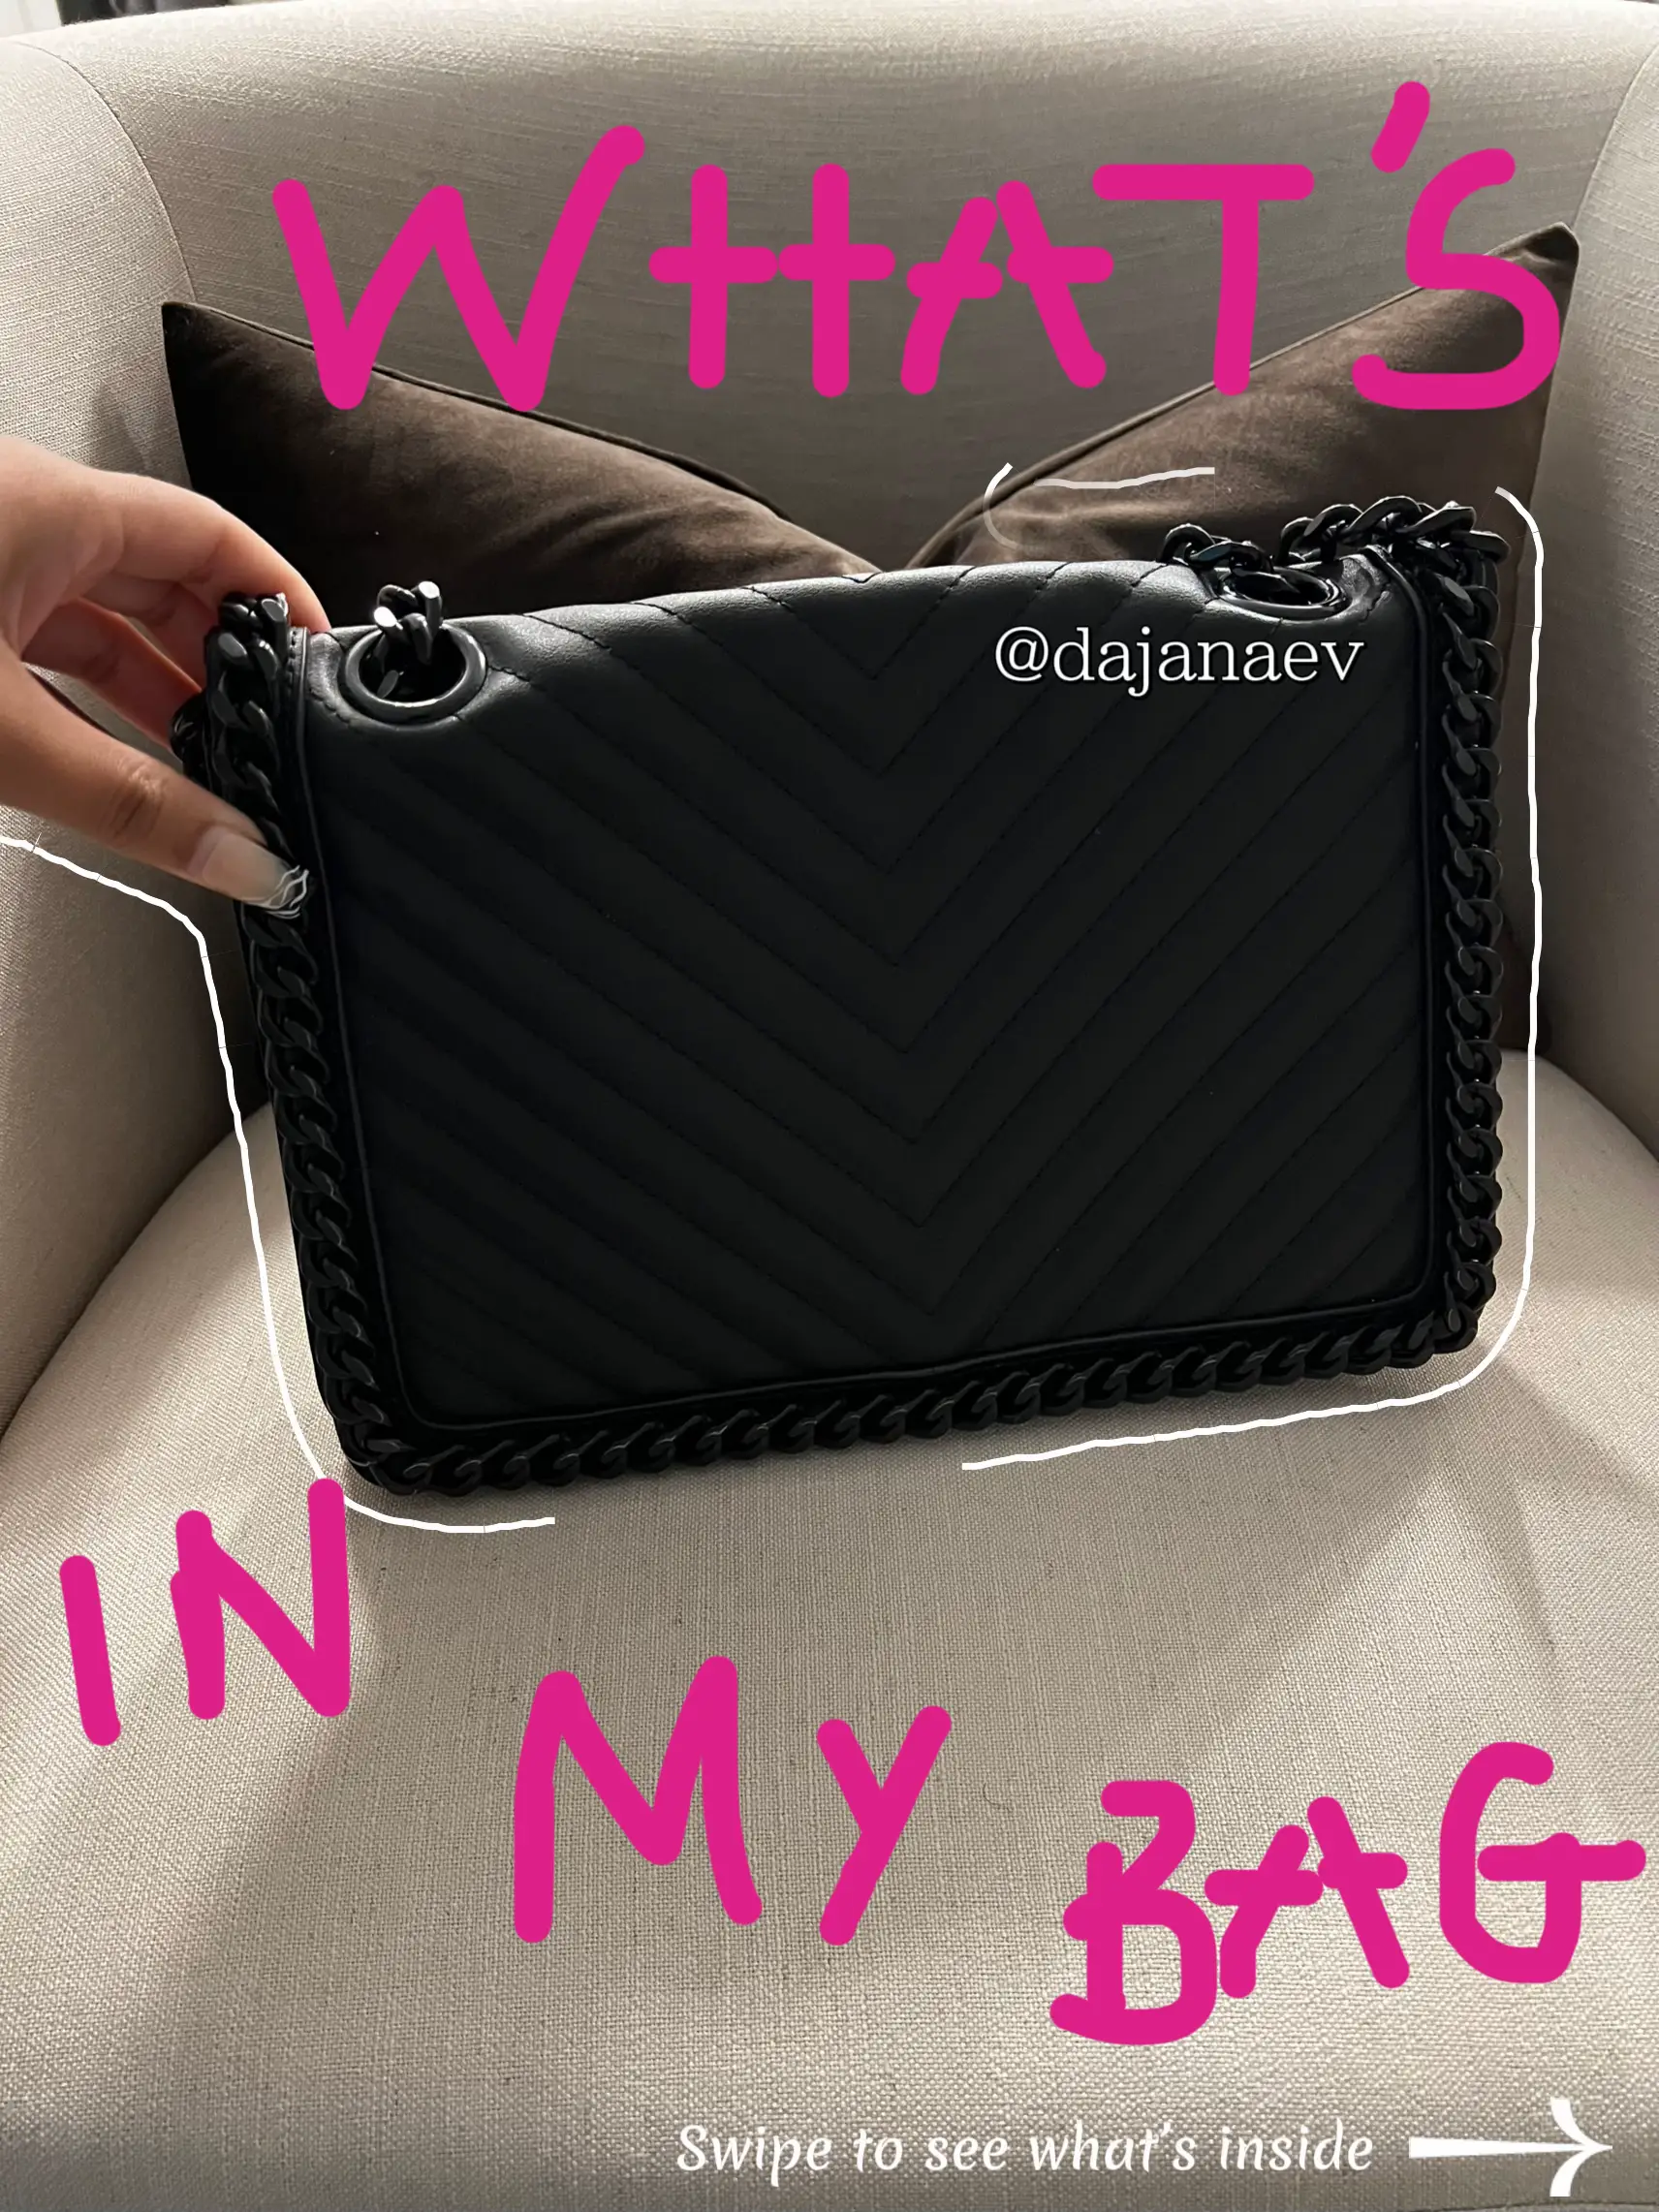 What's In My Purse?, Gallery posted by Dajanae V